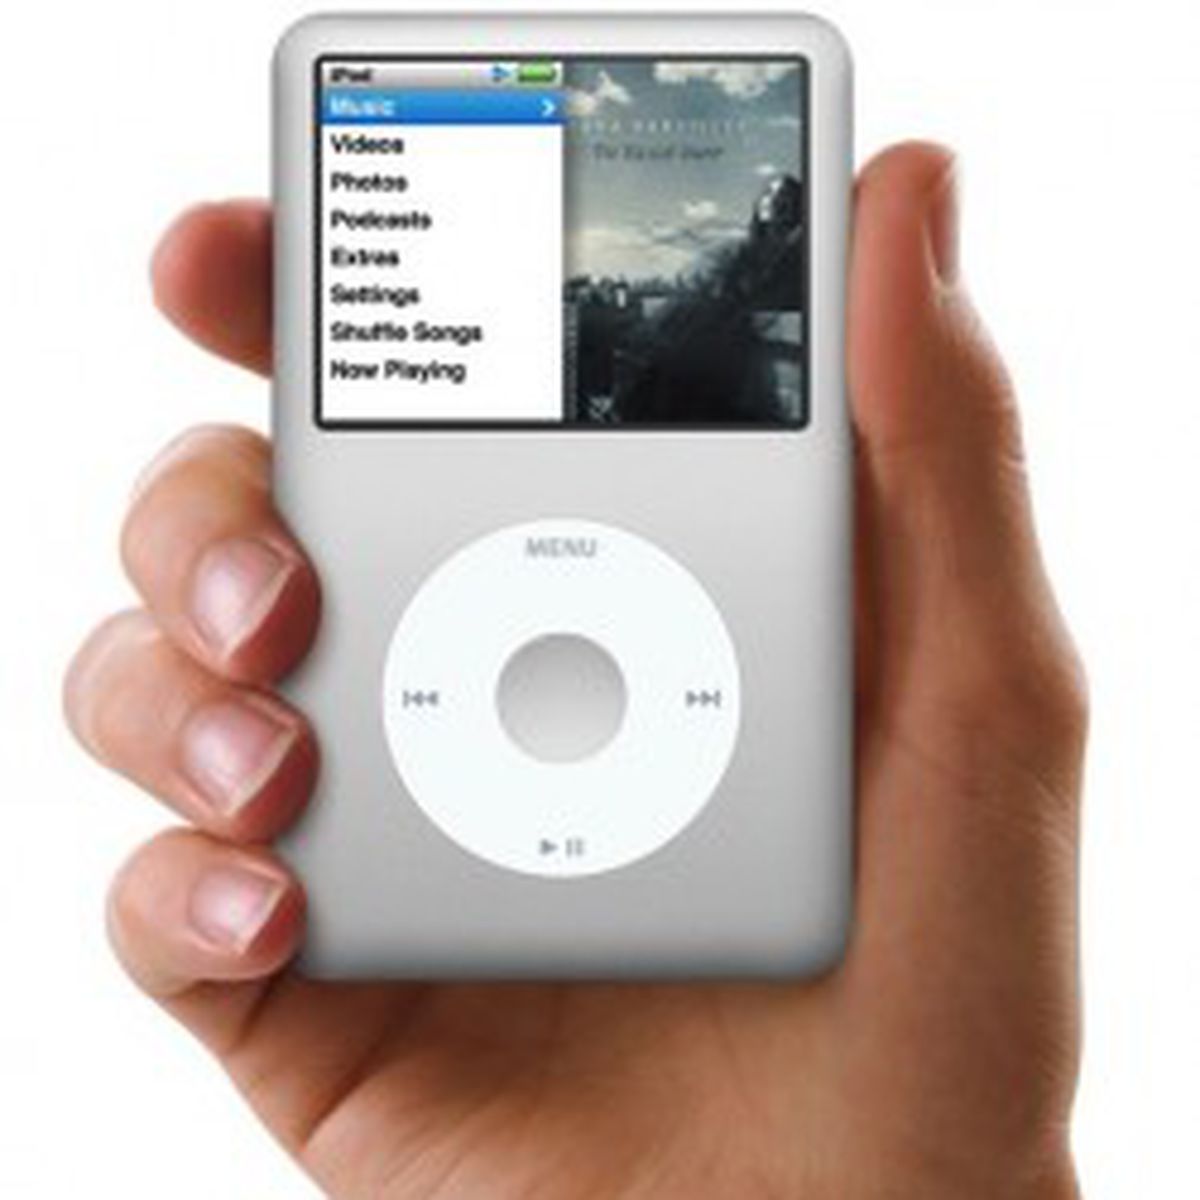 iPod classic: Everything We Know